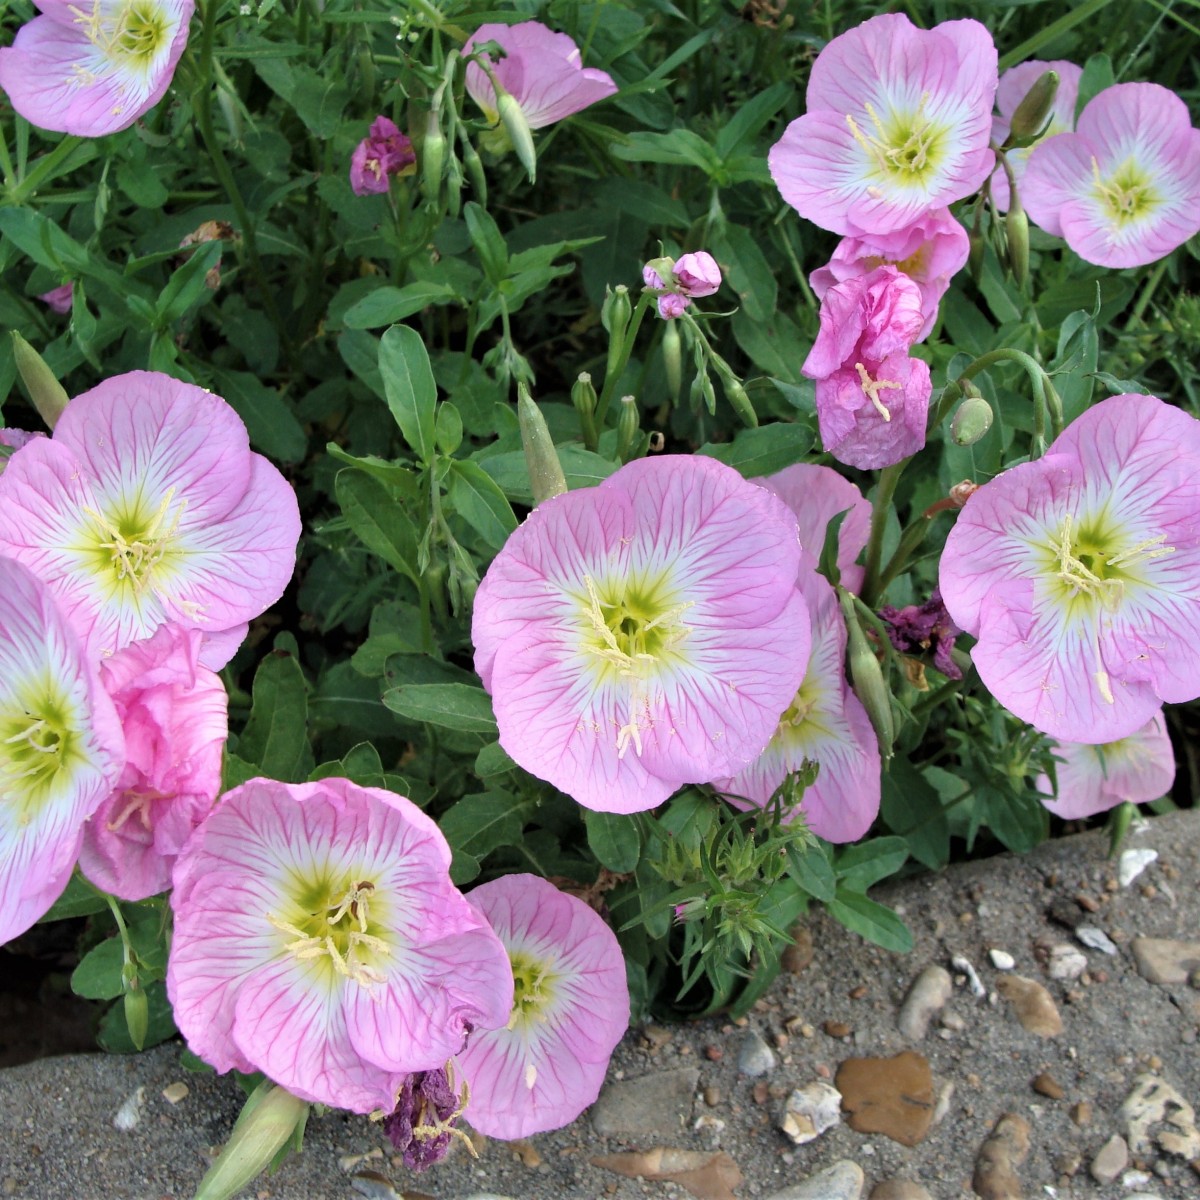 Know Your Natives – Showy Evening Primrose